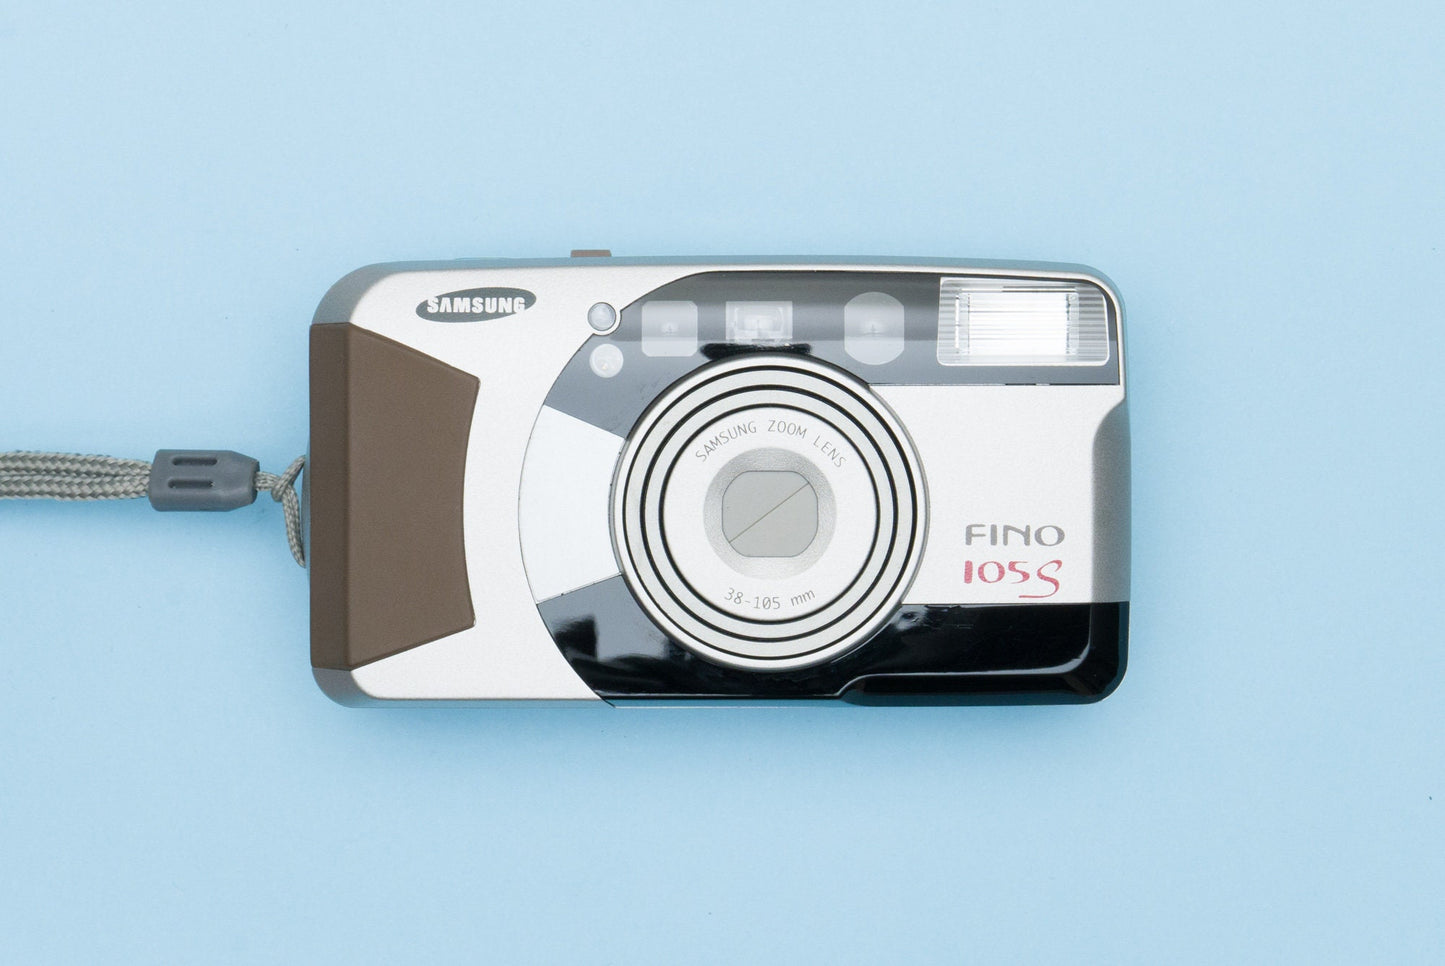 Samsung Fino 105s Compact 35mm Point and Shoot Film Camera